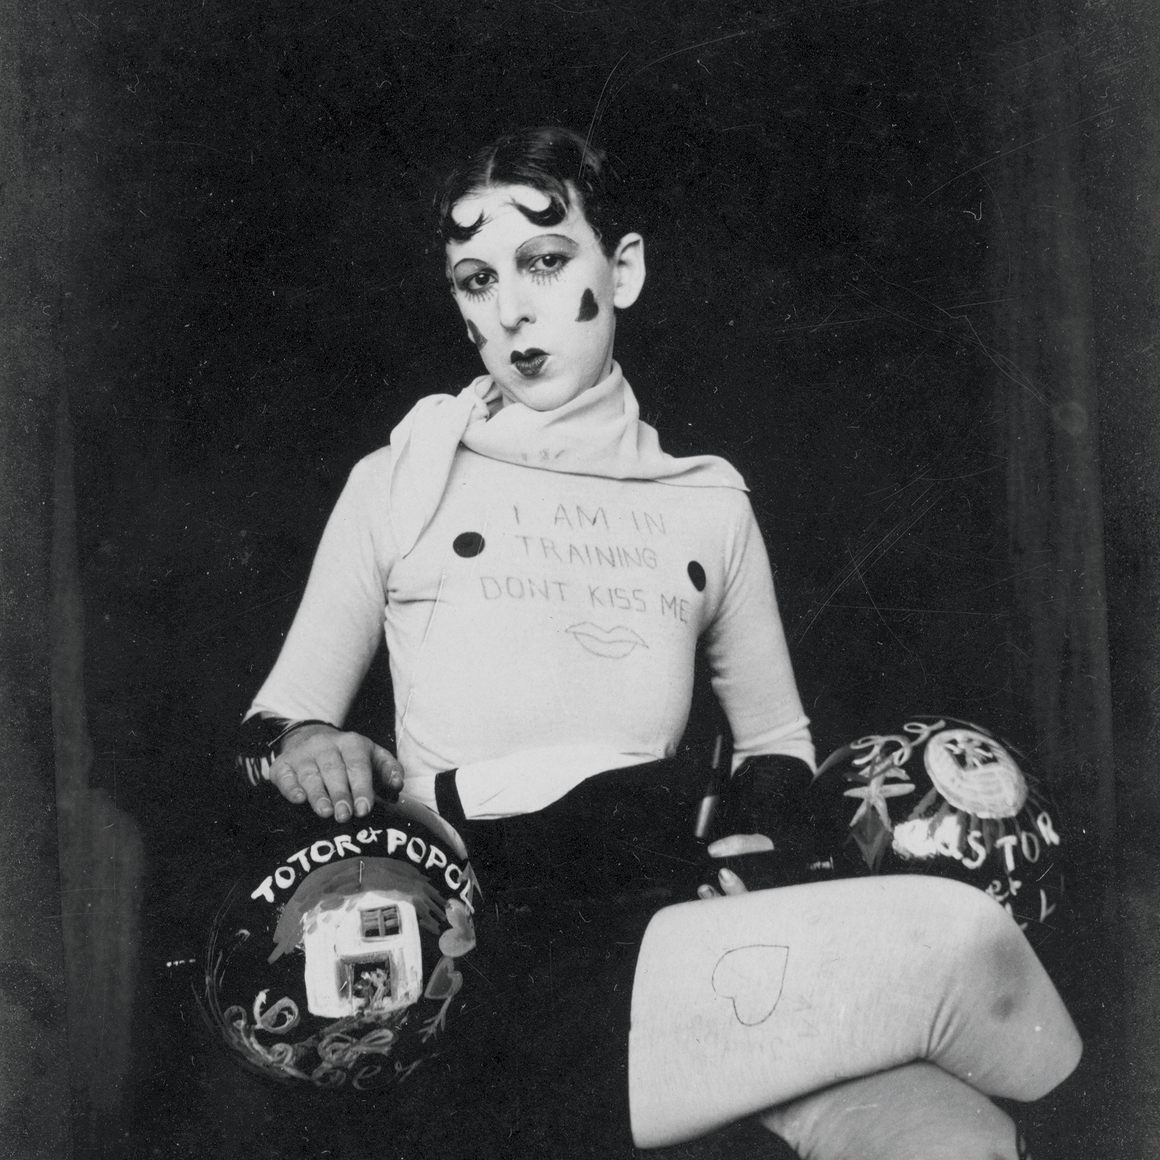 Claude Cahun, I Am in Training, Don't Kiss Me, 1927